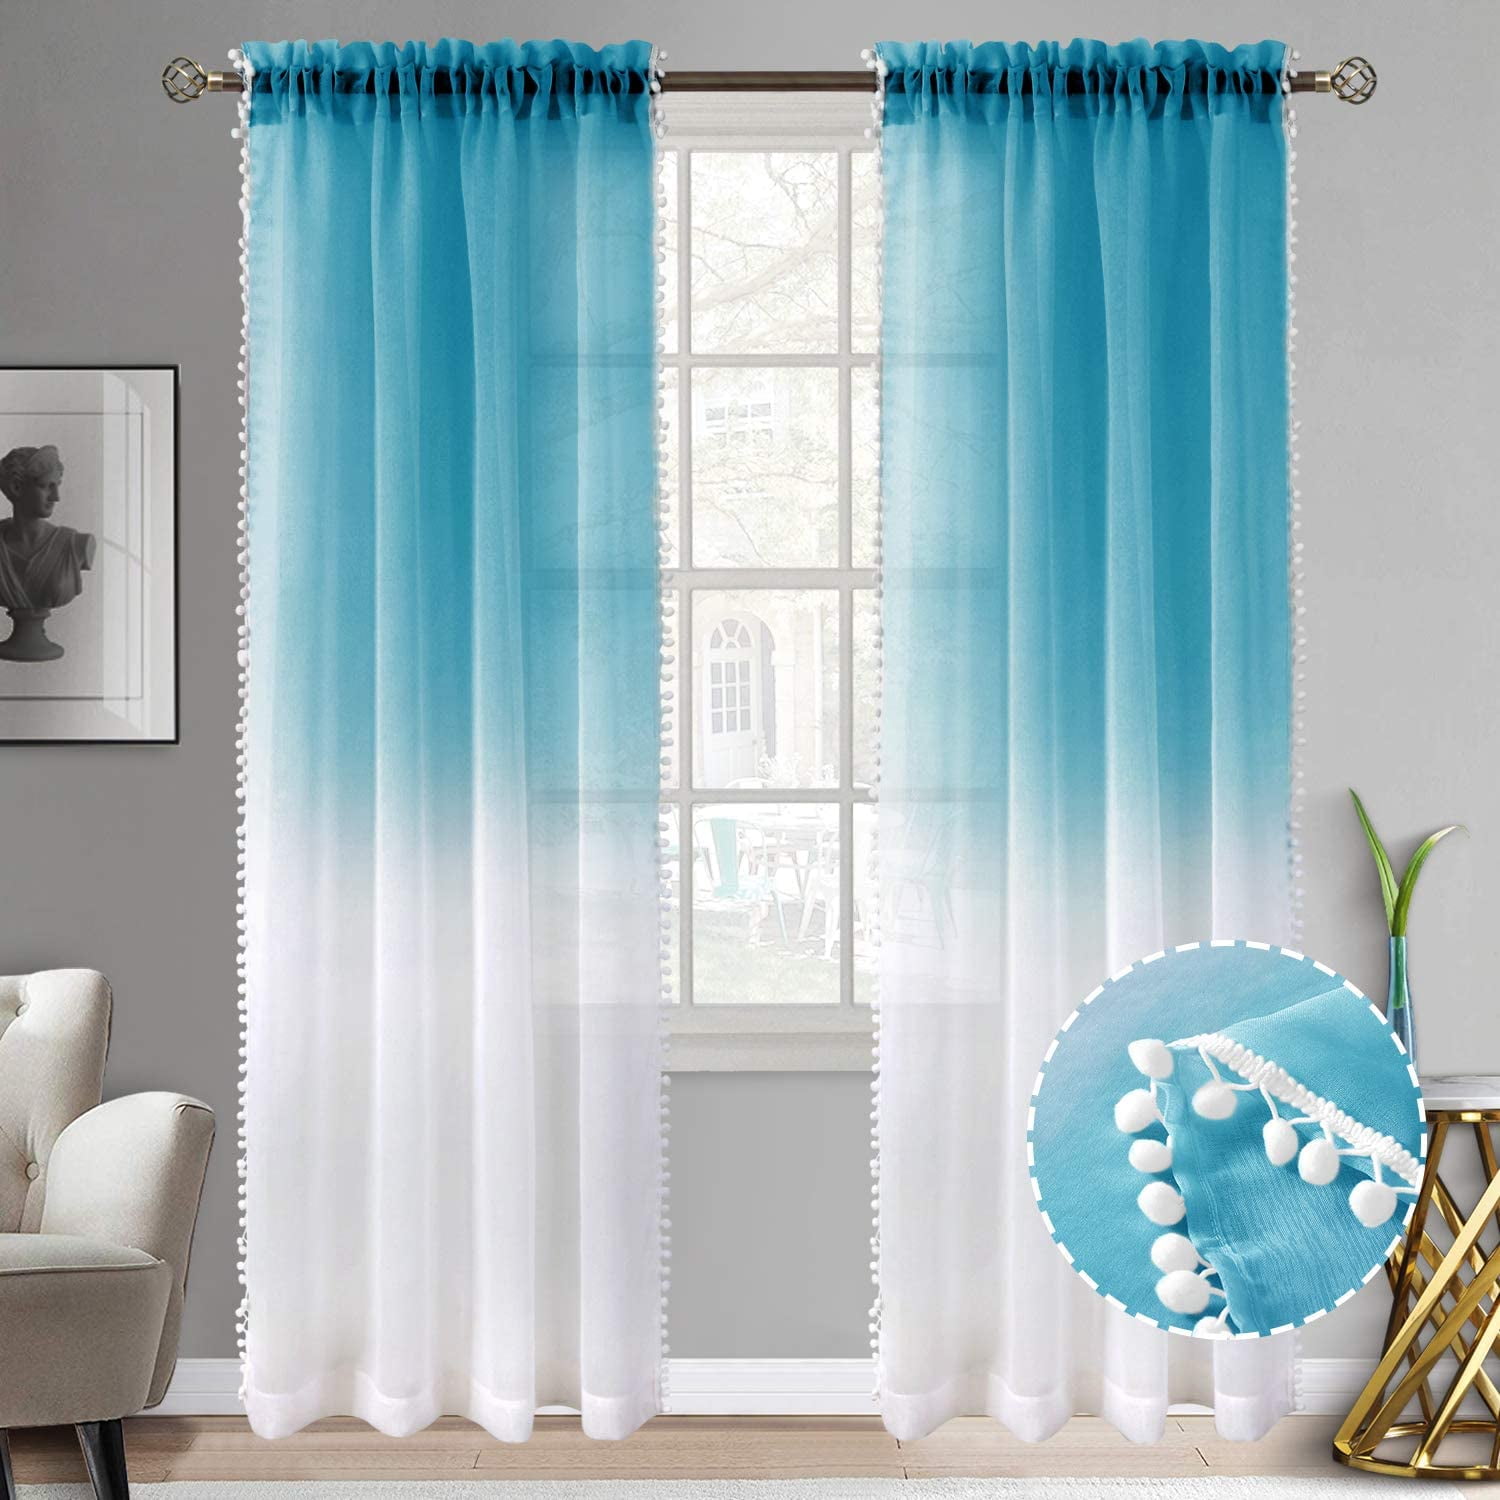 CHIC 1PC SEMI-SHEER 2 MIX COLOR GROMMET TOP WINDOW CURTAIN PANEL IVORY TURQUOISE 